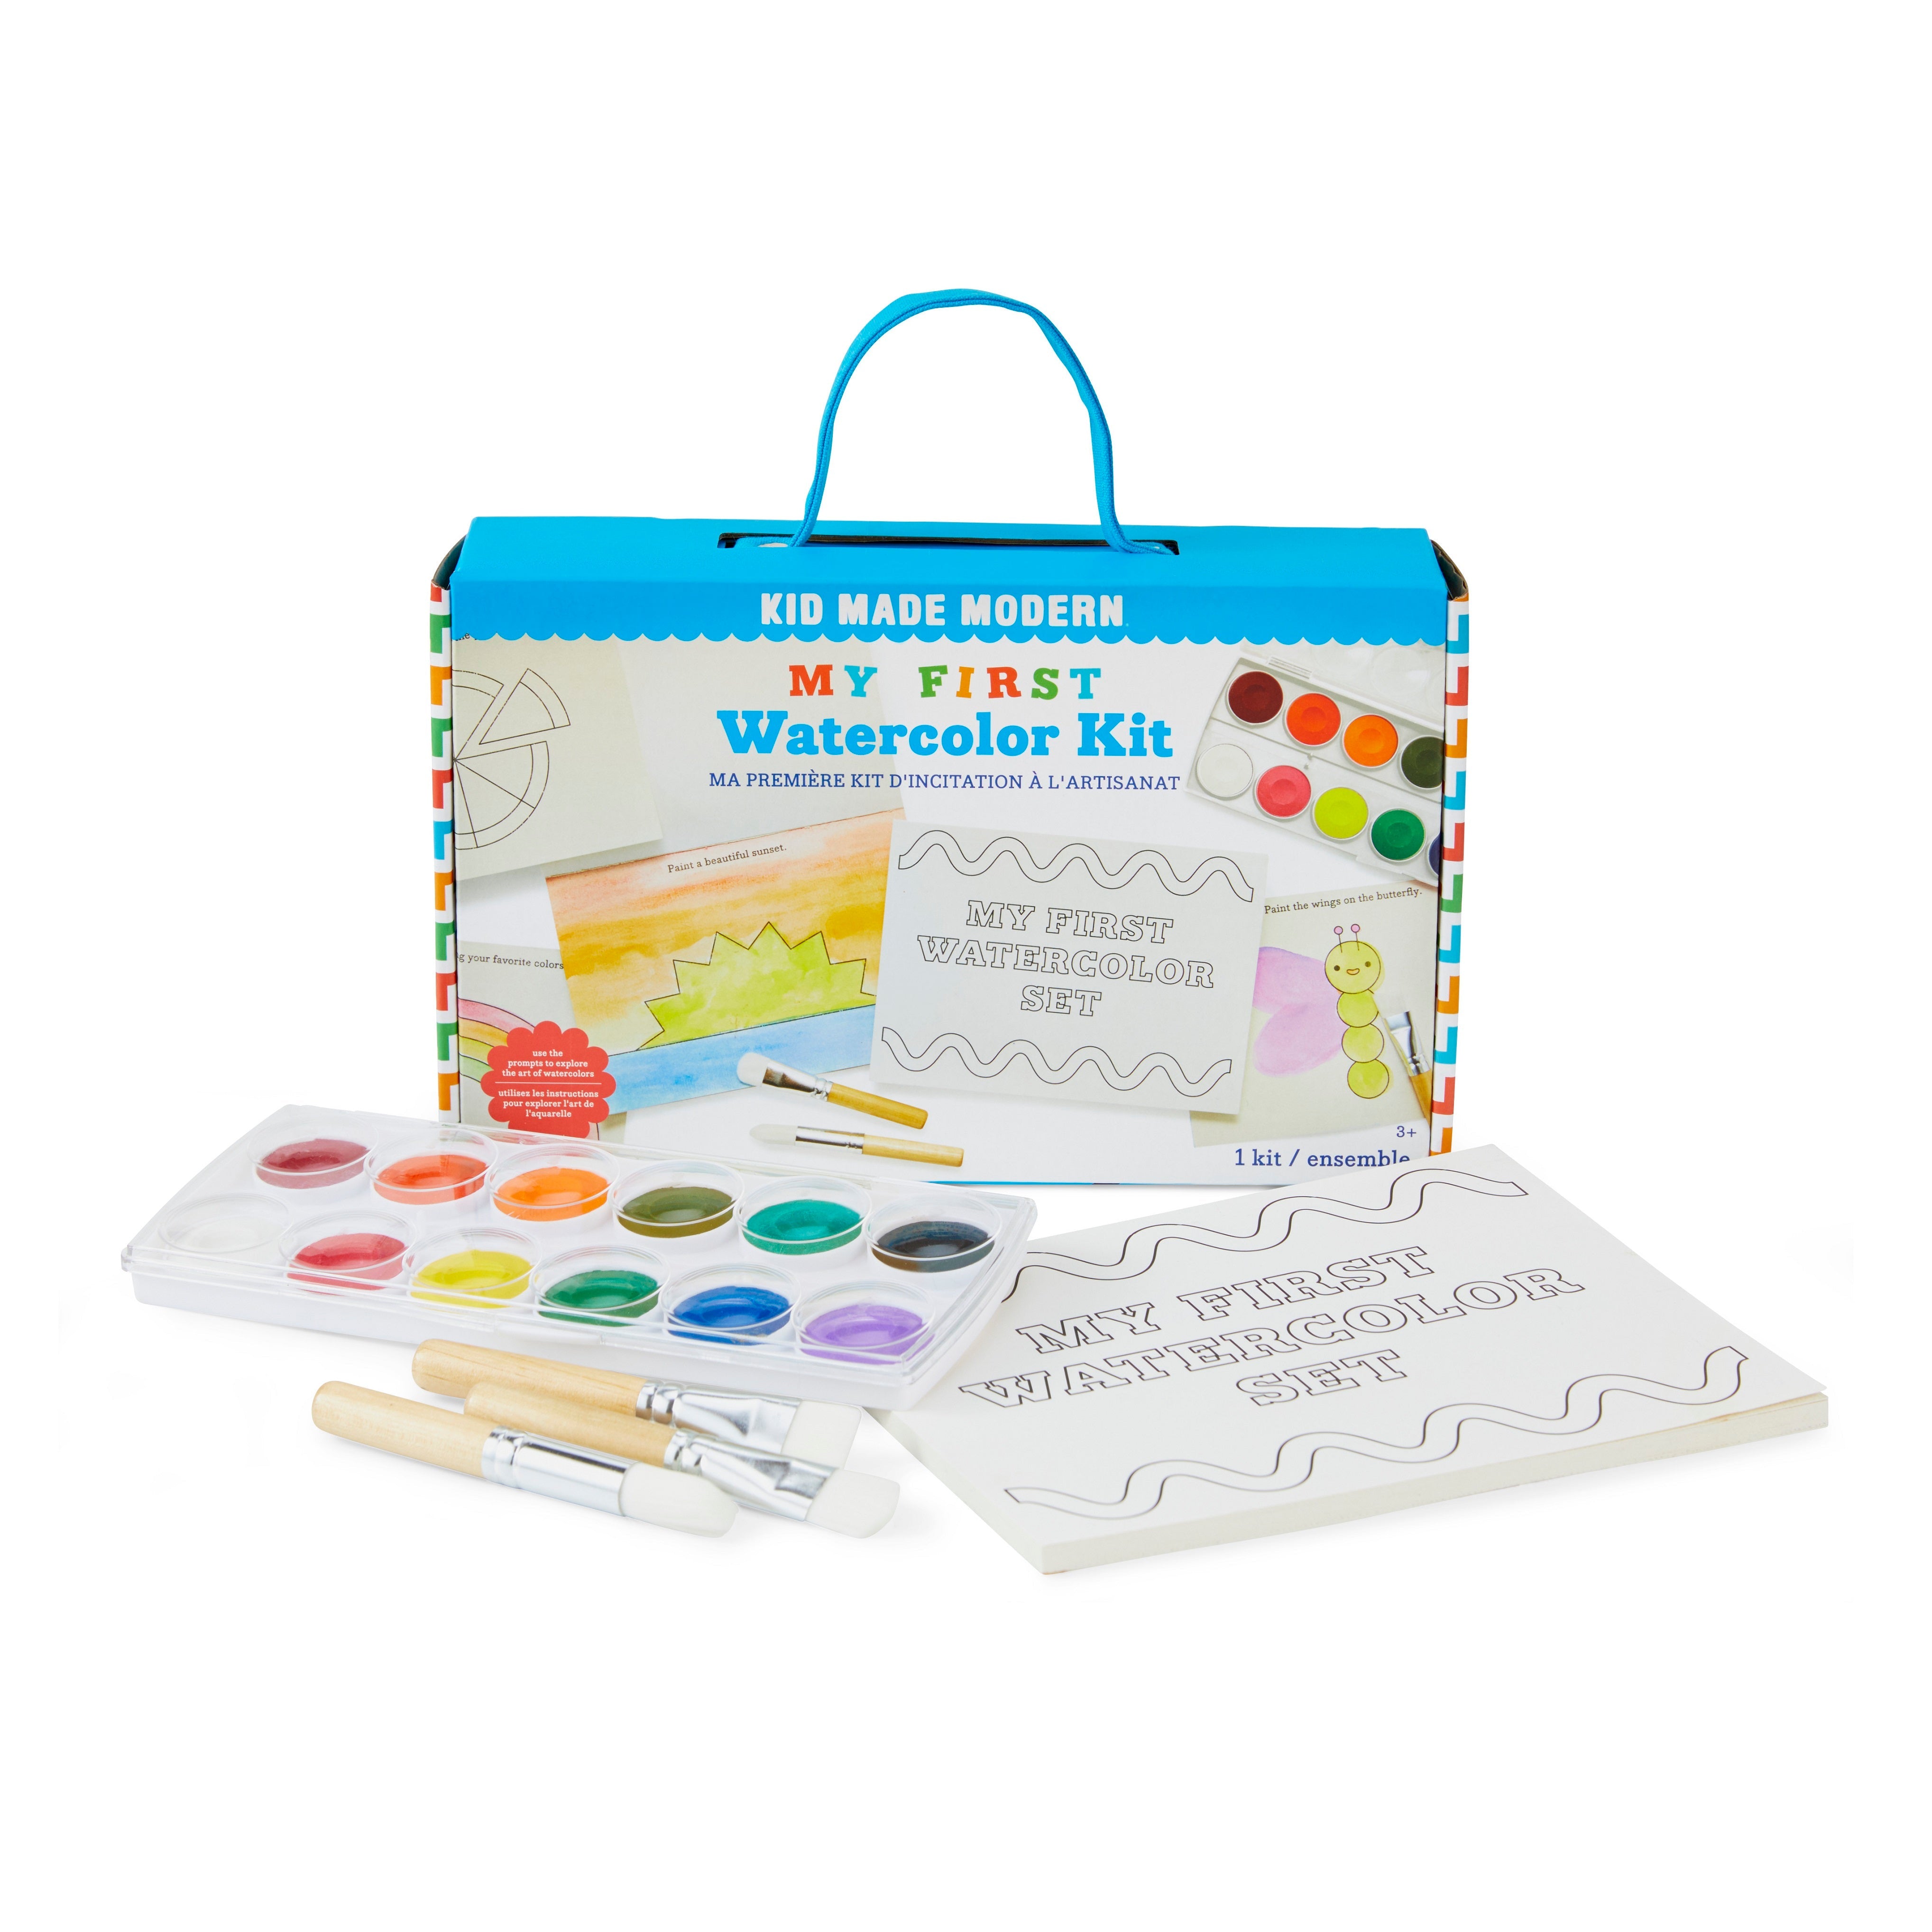 Kid Made Modern My First Watercolor Kit Watercolor Sets